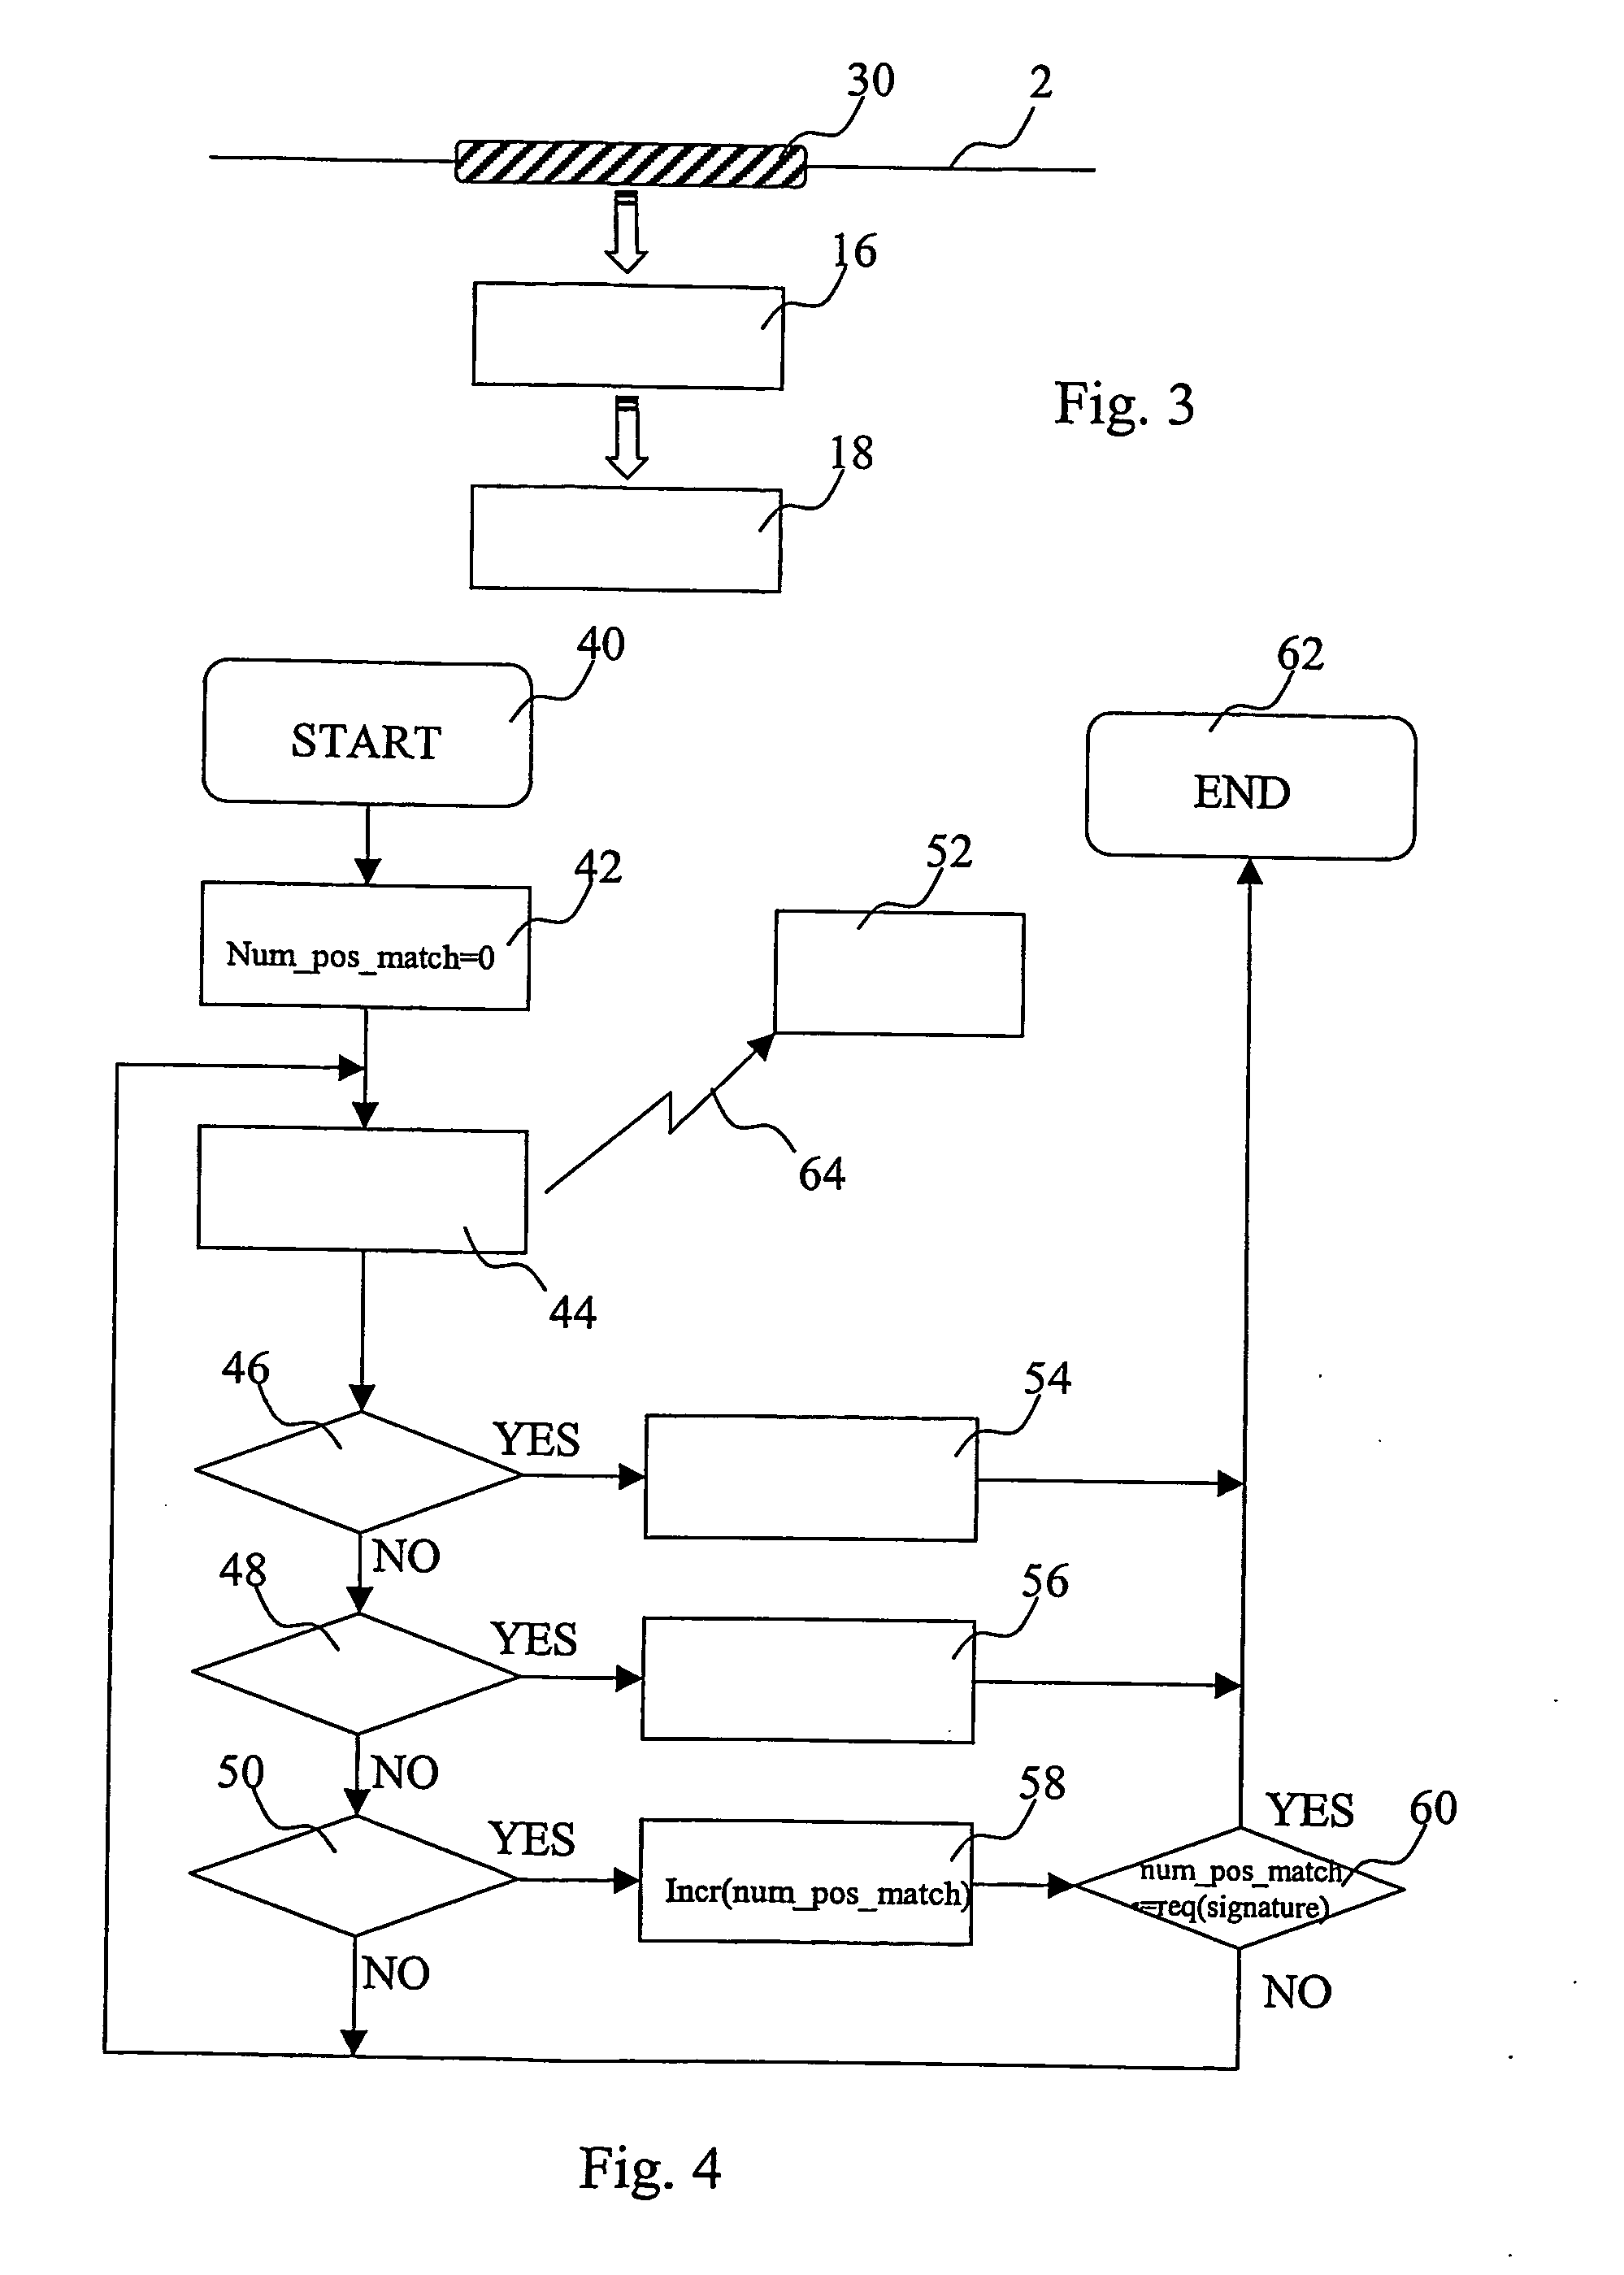 Method and system for detecting unauthorized use of a communication network